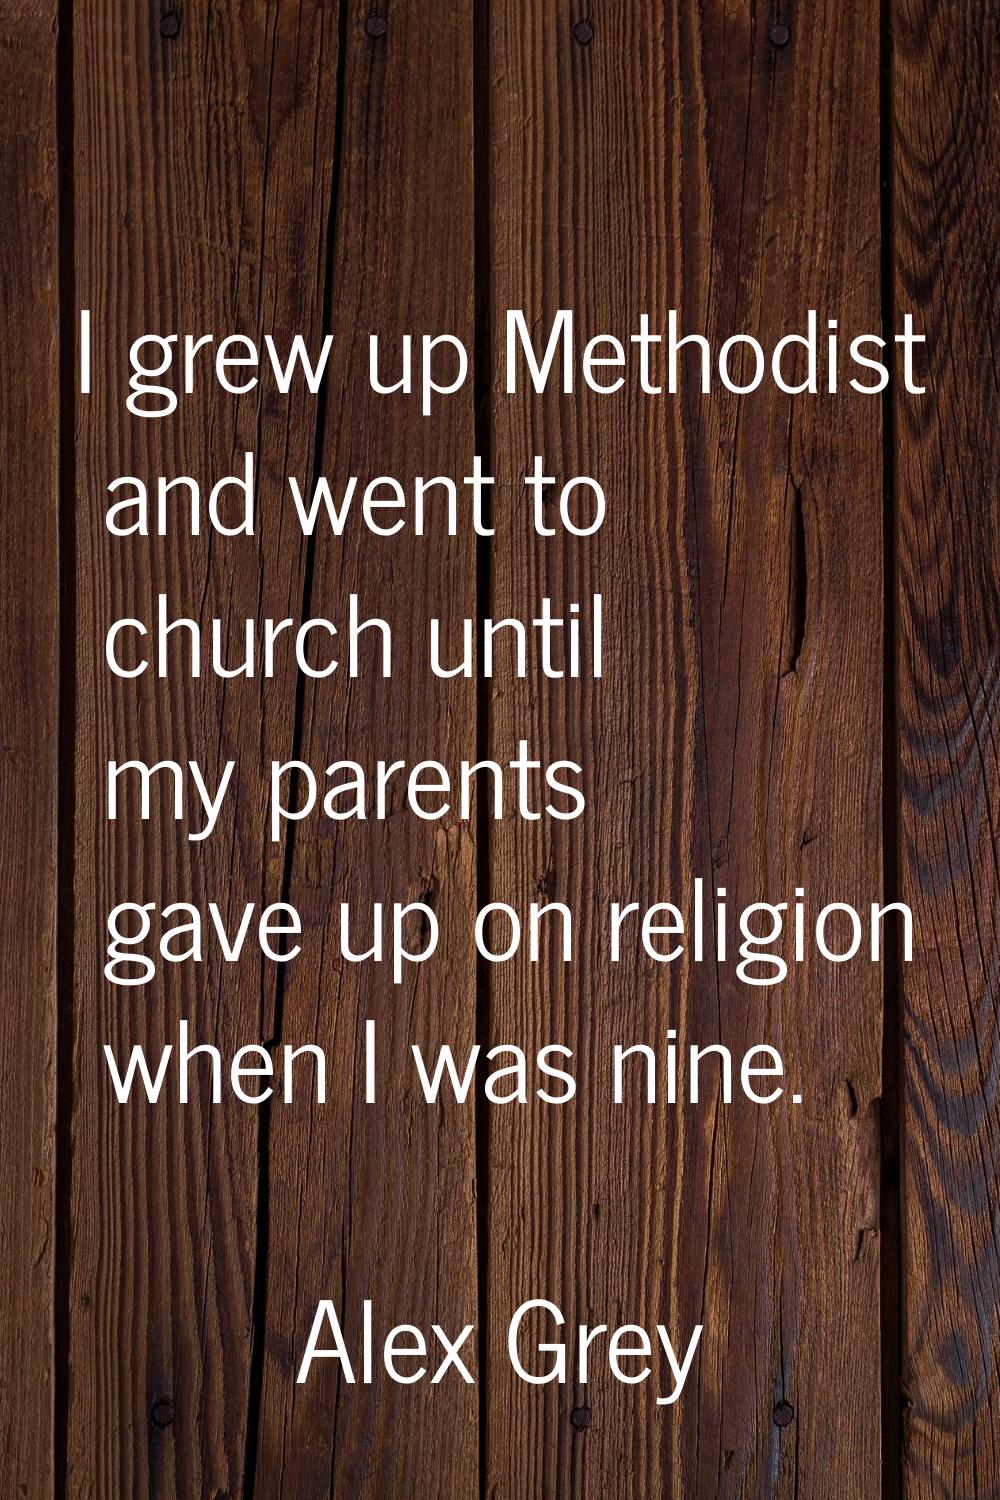 I grew up Methodist and went to church until my parents gave up on religion when I was nine.